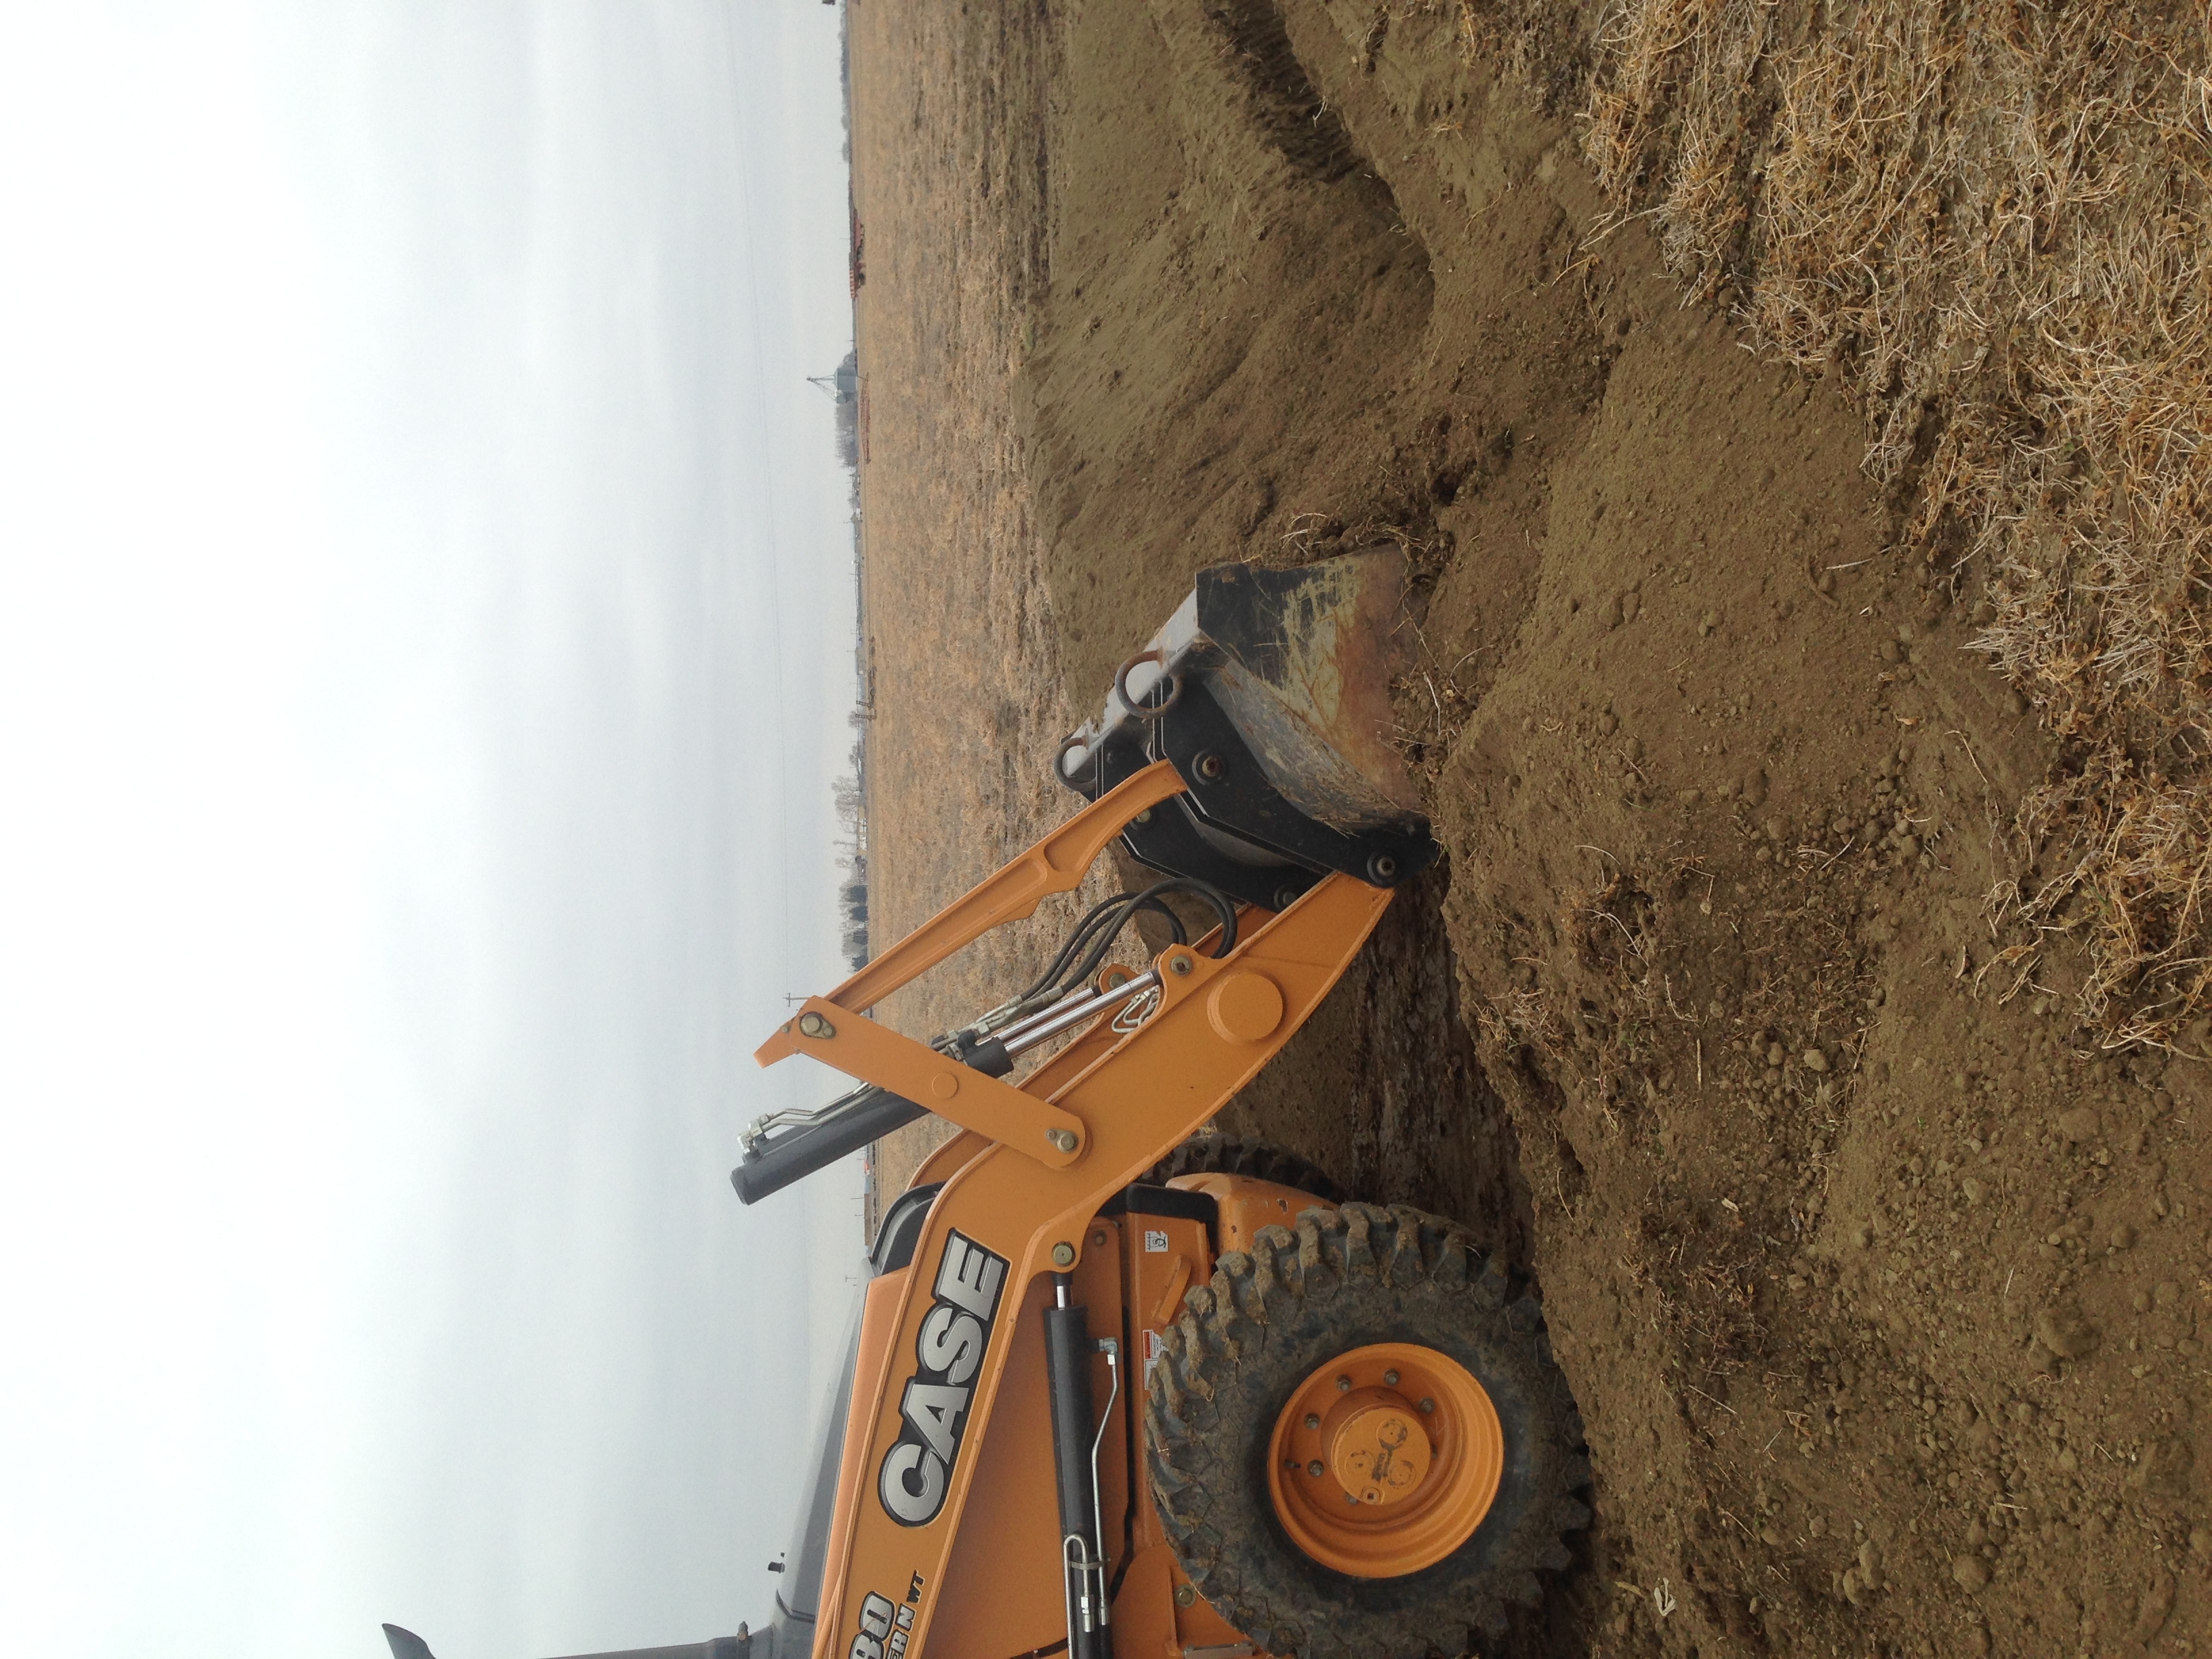 Backhoe covering installed water line - Boonco Excavating